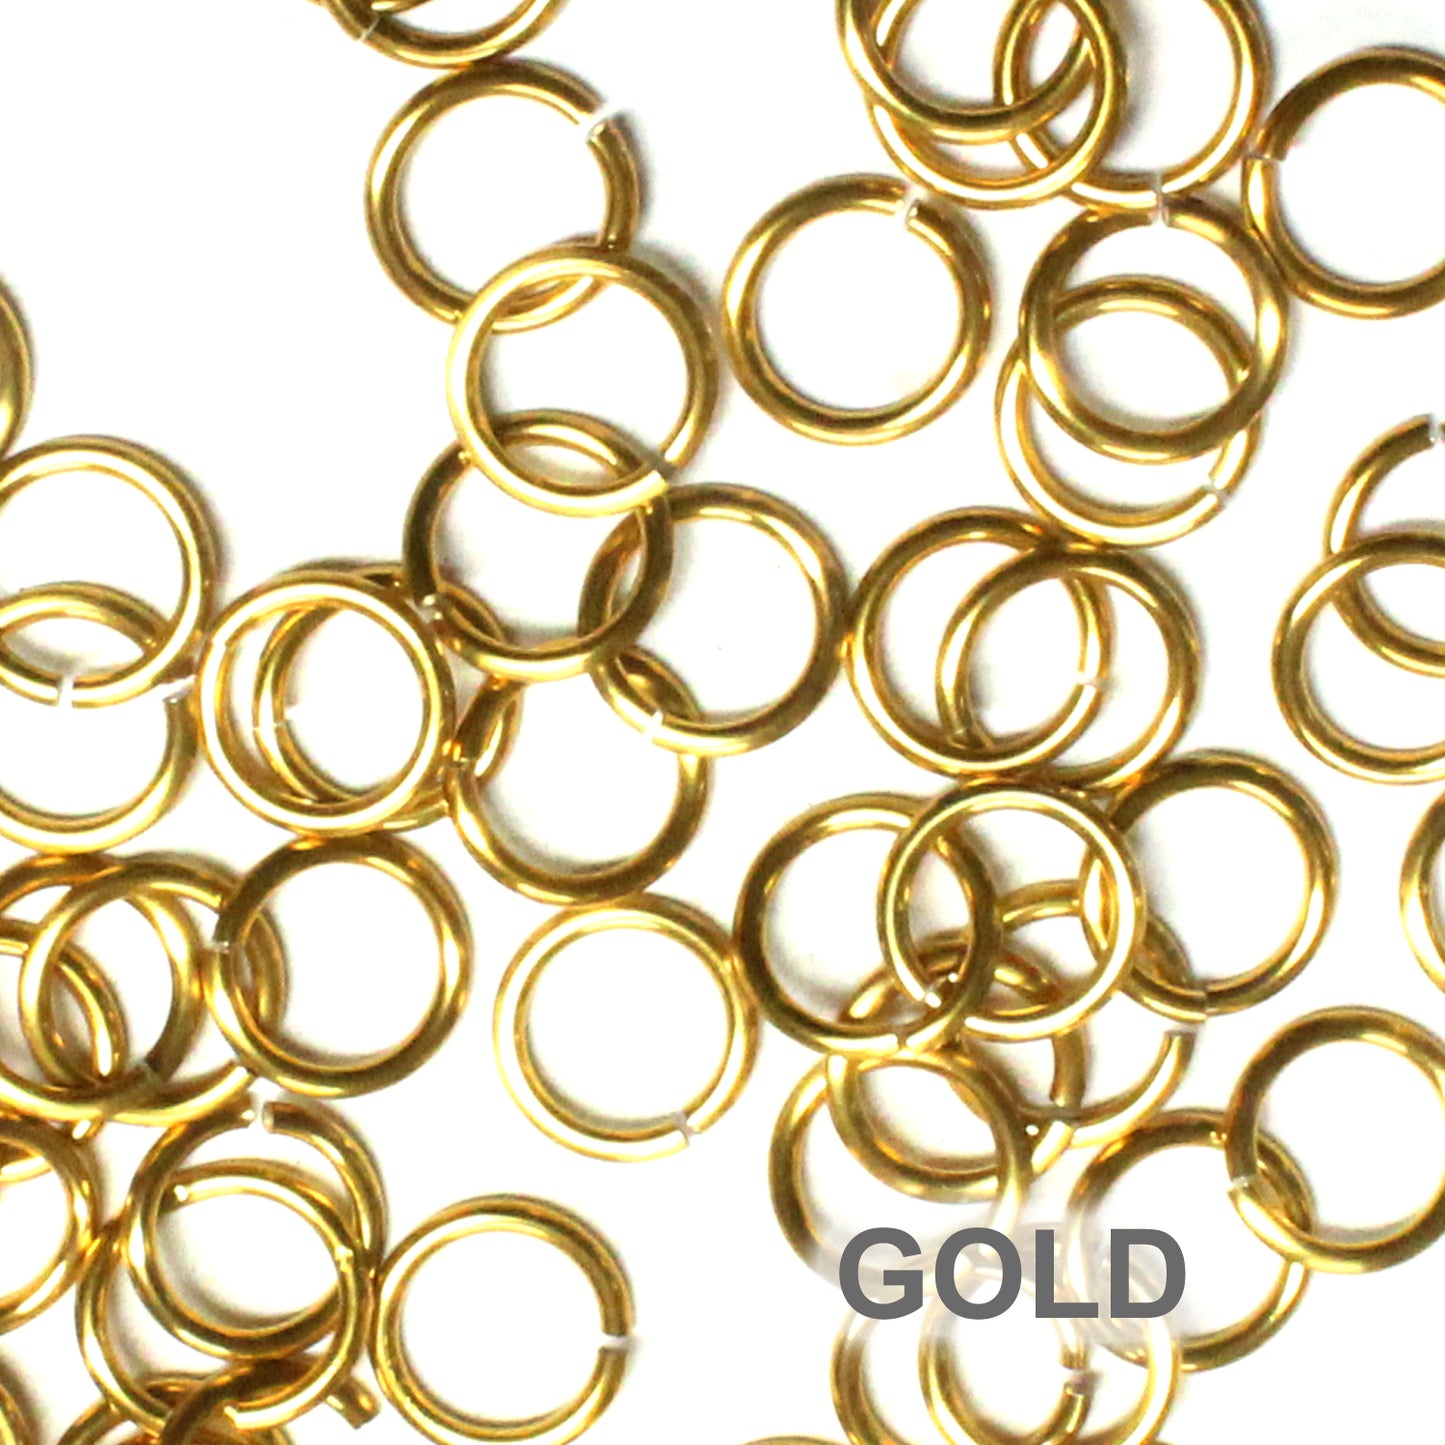 SHINY GOLD 7mm 16 GA AWG Jump Rings / 5 Gram Pack (approx 70) / sawcut round open anodized aluminum